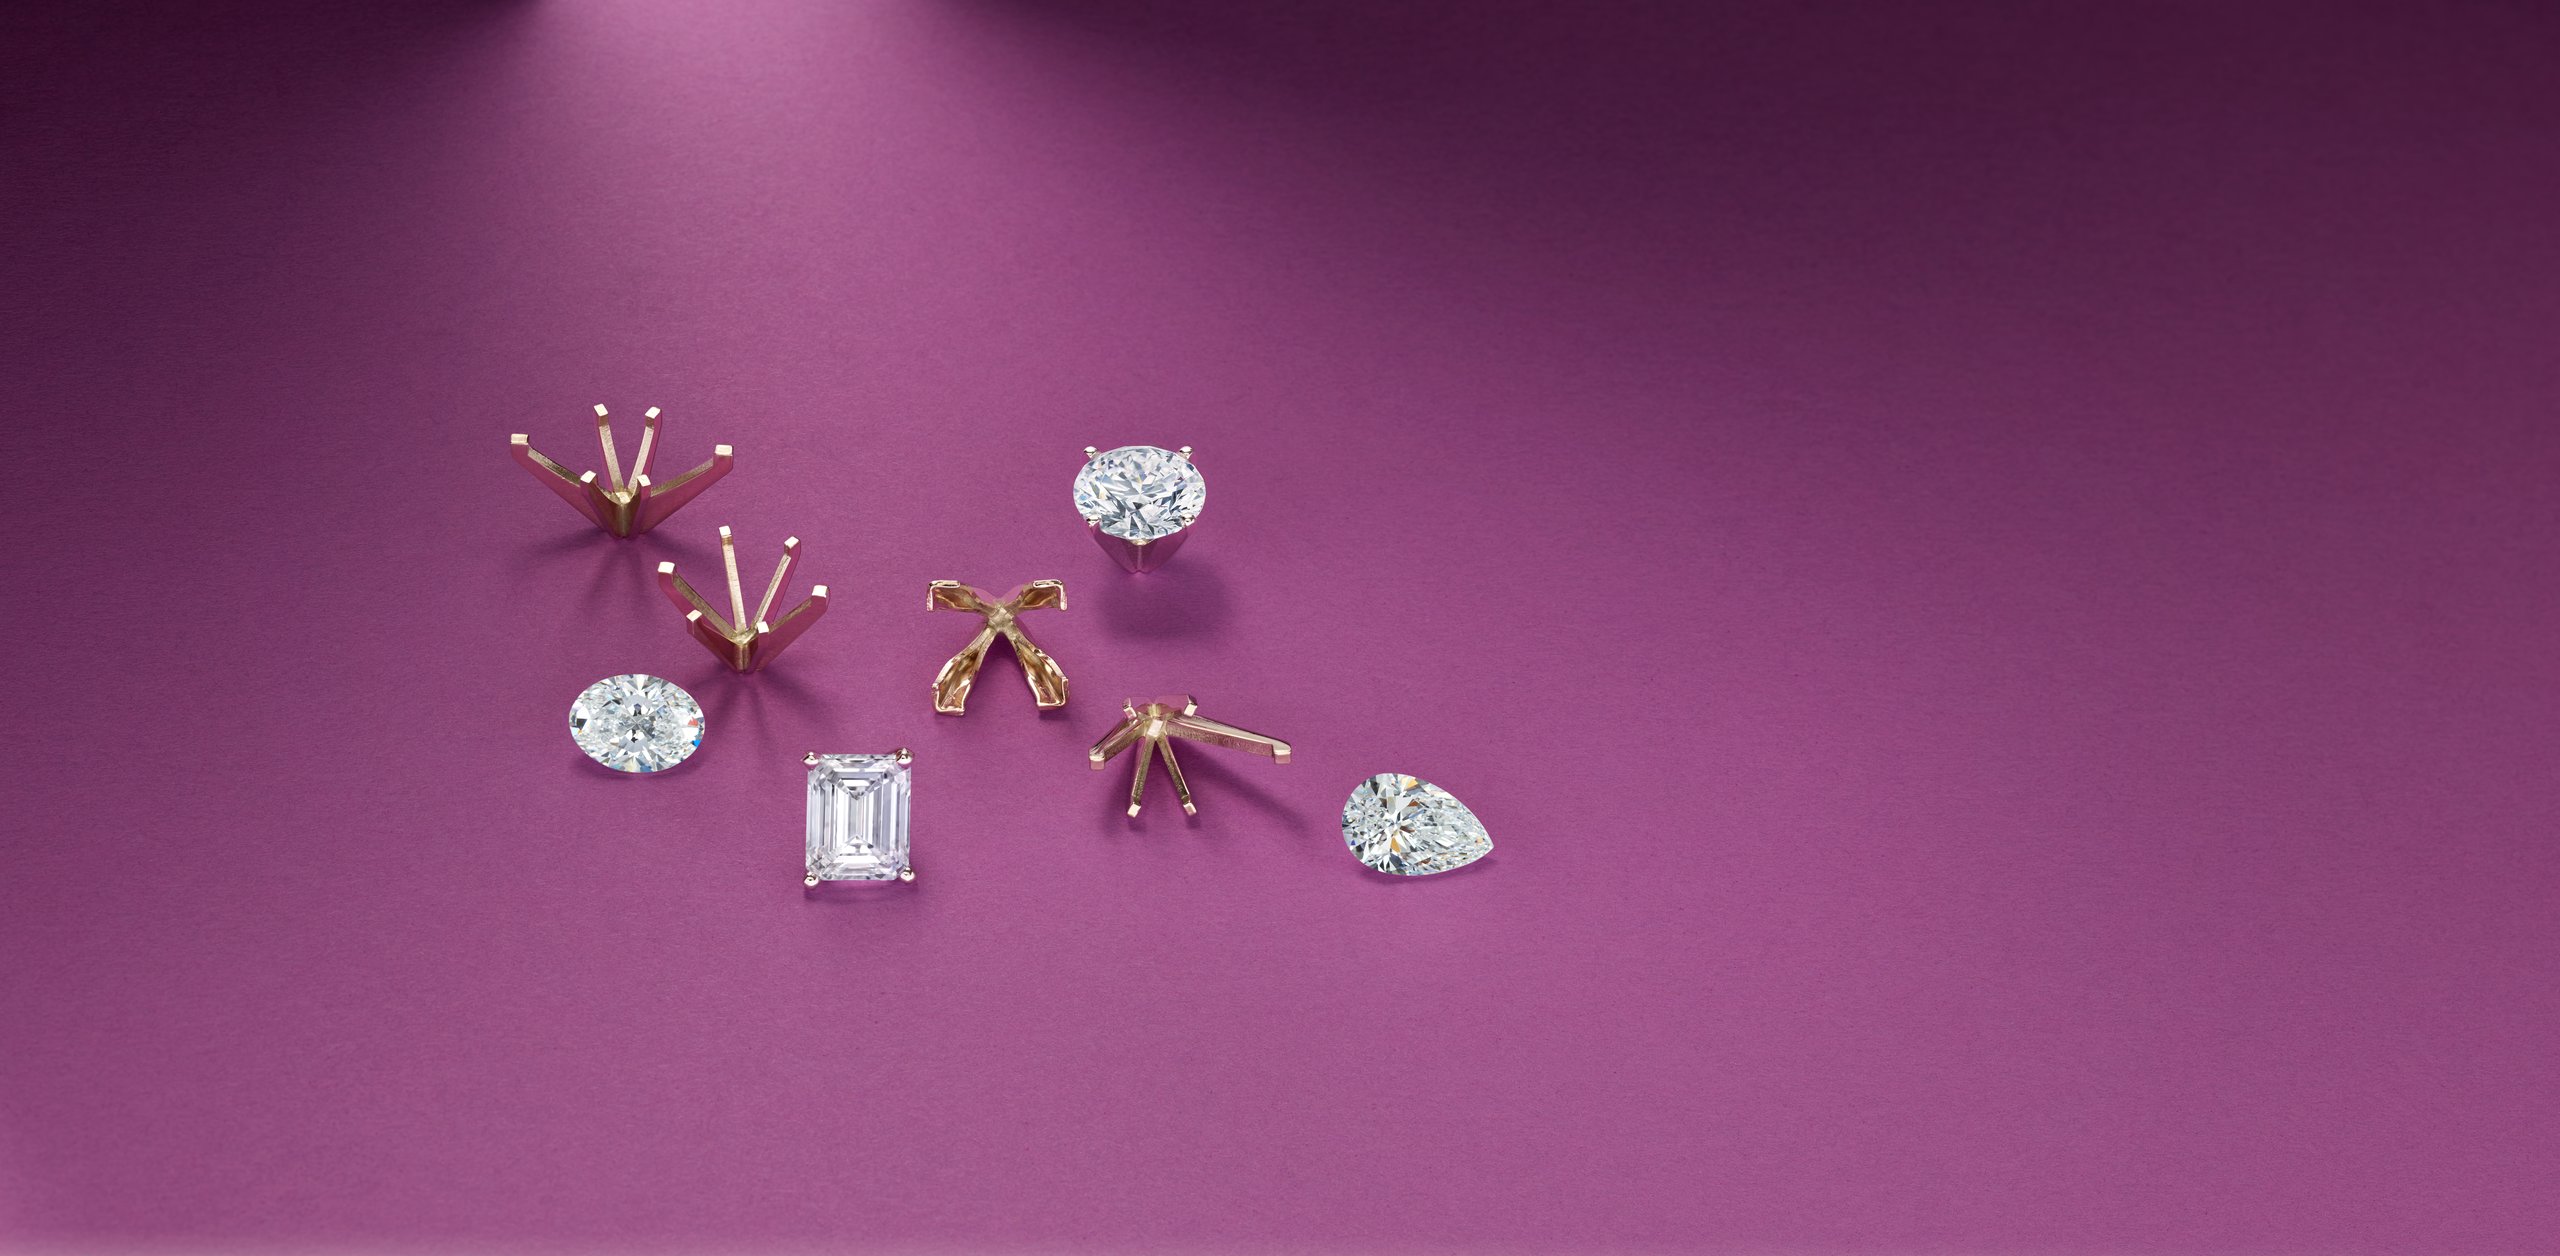 Discover the latest innovations for your larger carat weight designs.